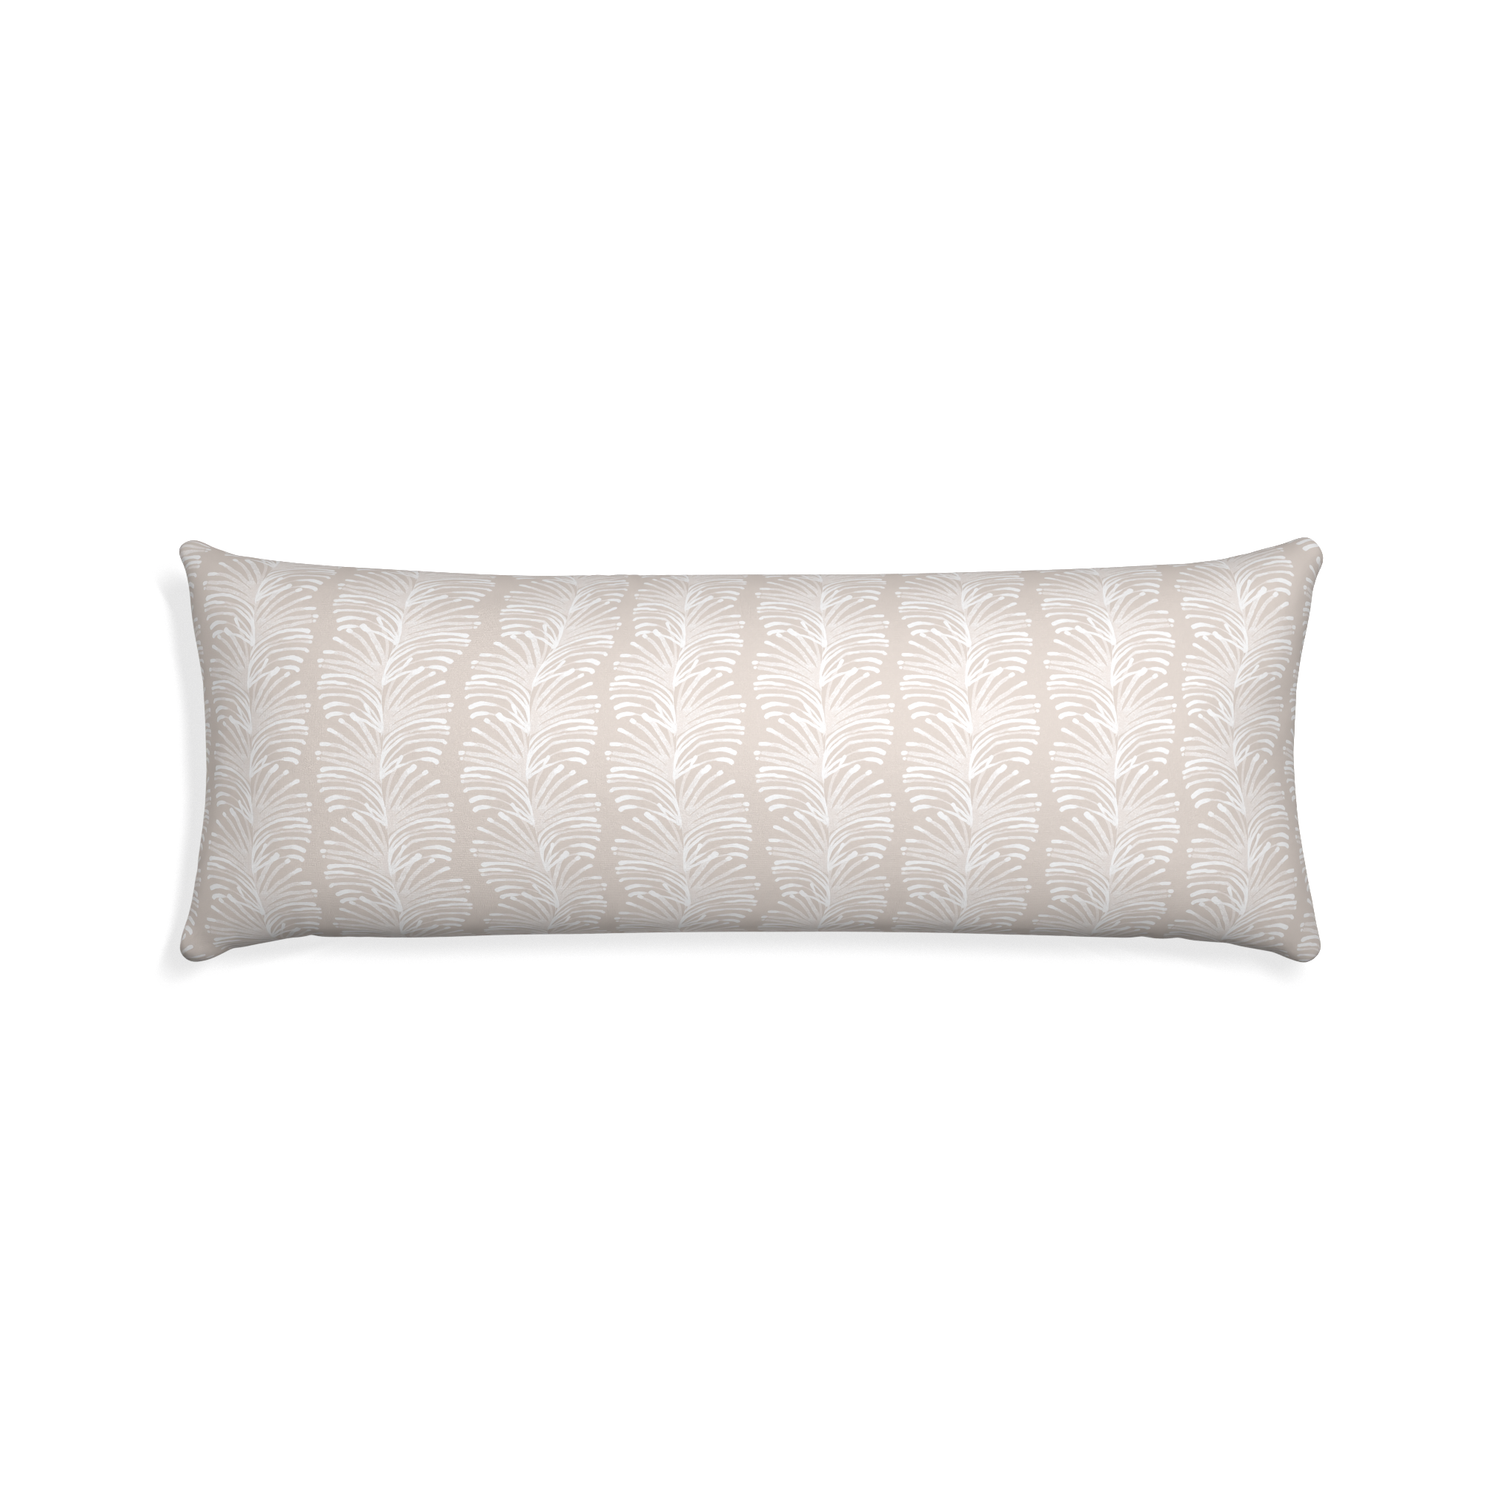 Xl-lumbar emma sand custom pillow with none on white background